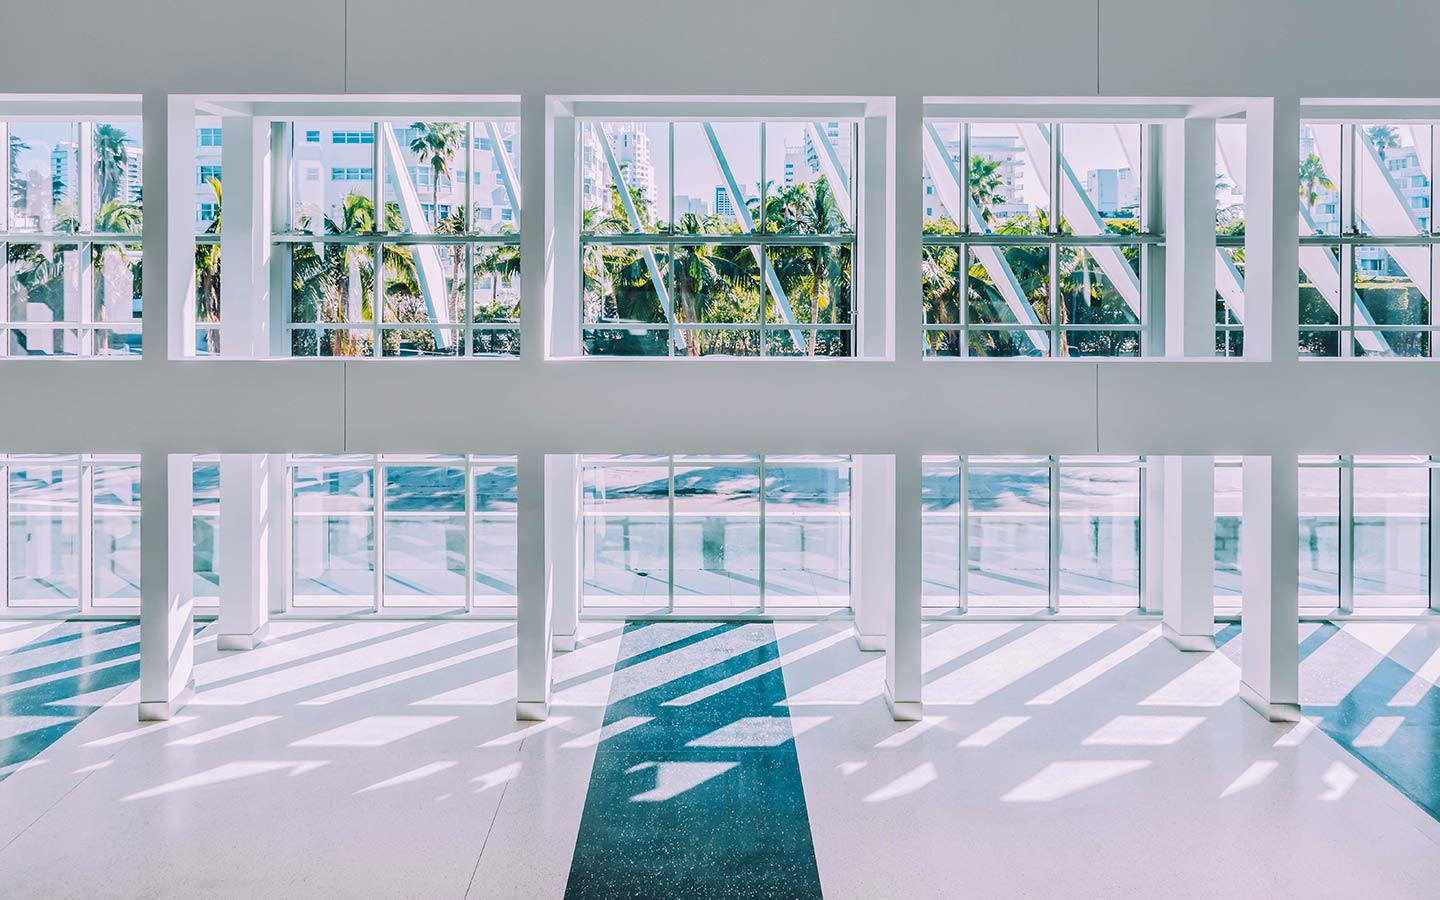 View looking out the front windows of the Miami Beach Convention Center